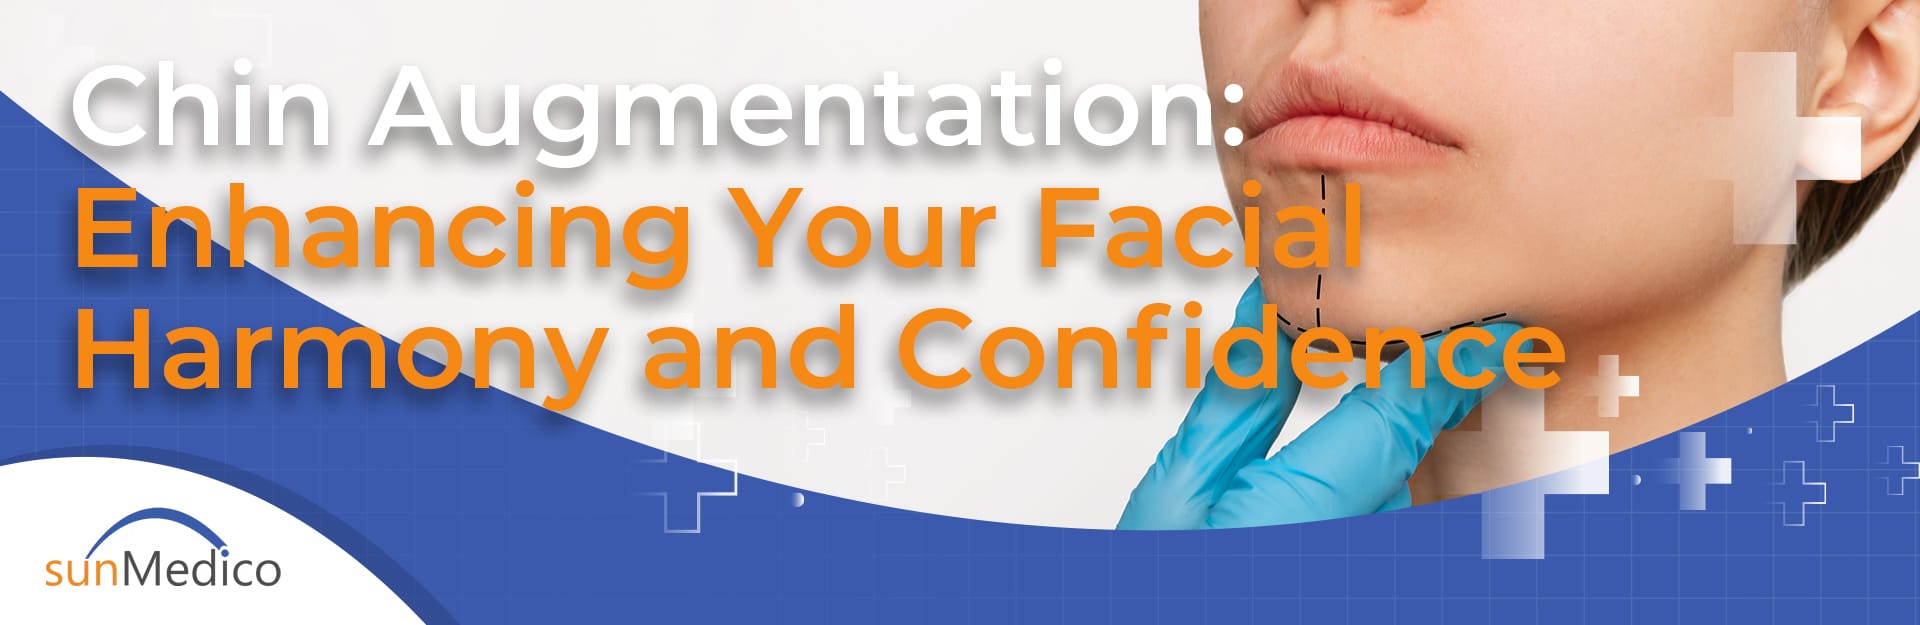 Chin Augmentation: Enhancing Your Facial Harmony and Confidence